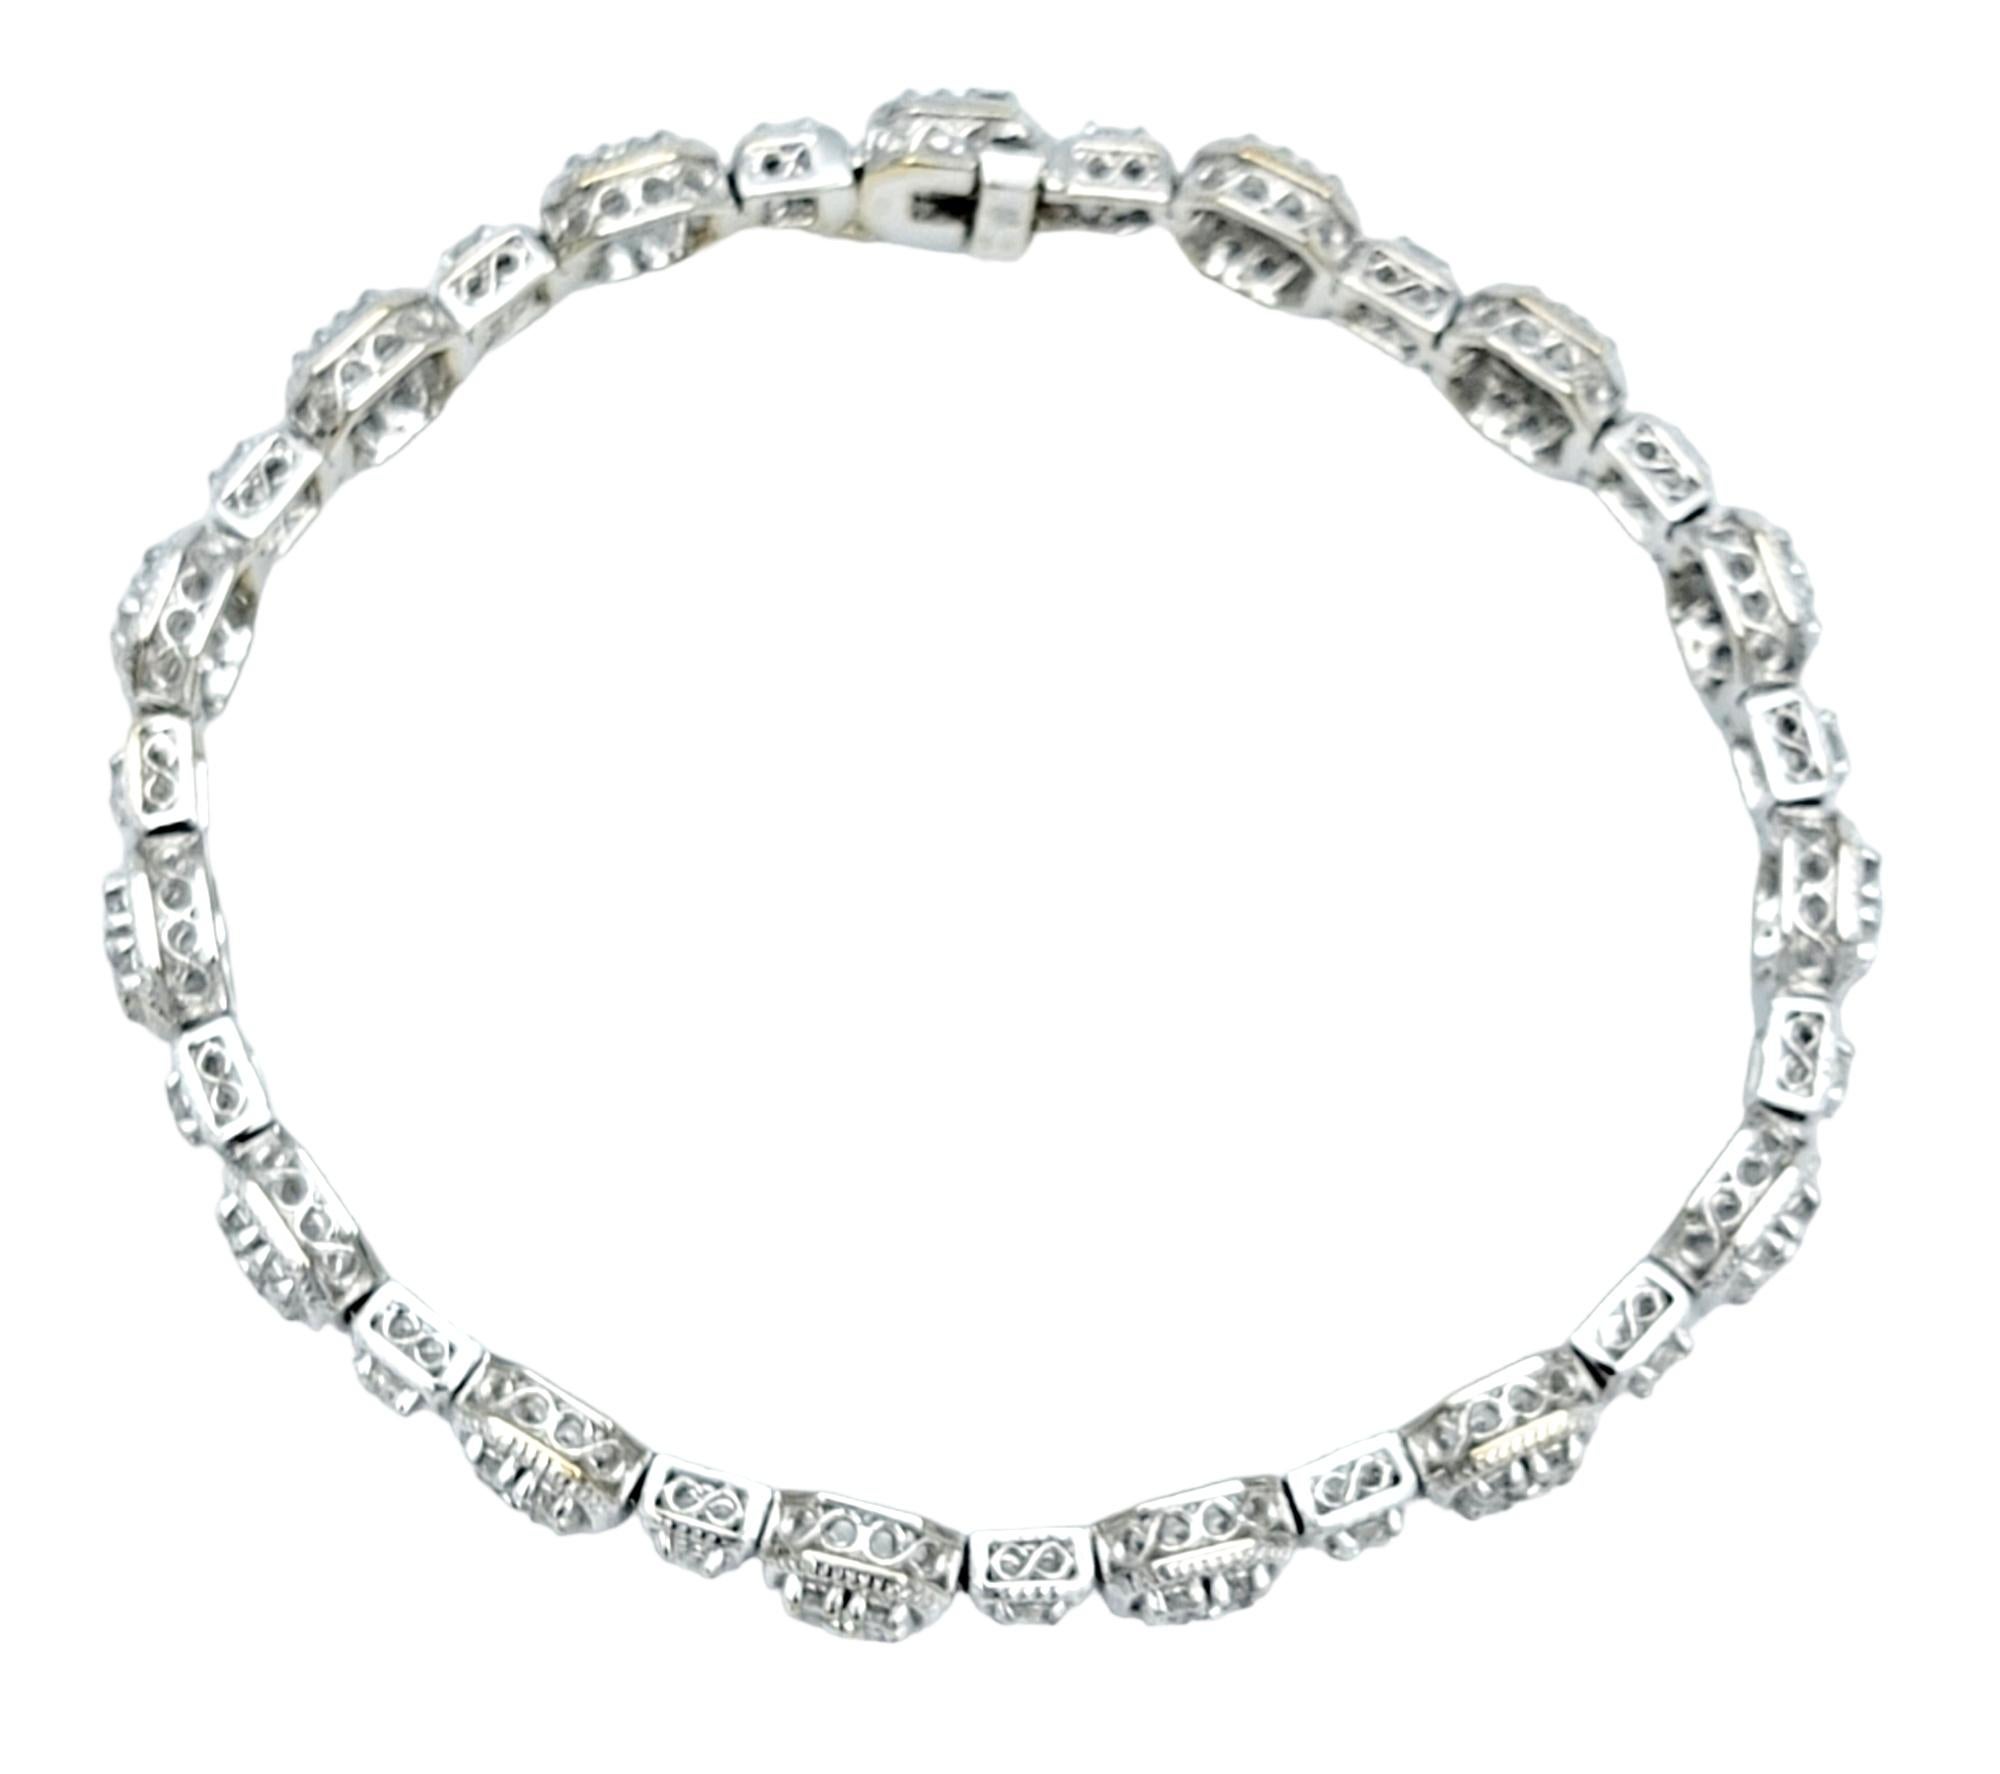 Gorgeous, sparkling diamond bracelet with a modern twist. The intricate milgrain detailing adds elevated design and texture to the everyday tennis bracelet. This dazzling piece is sure to impress! 

This absolutely beautiful bracelet features a